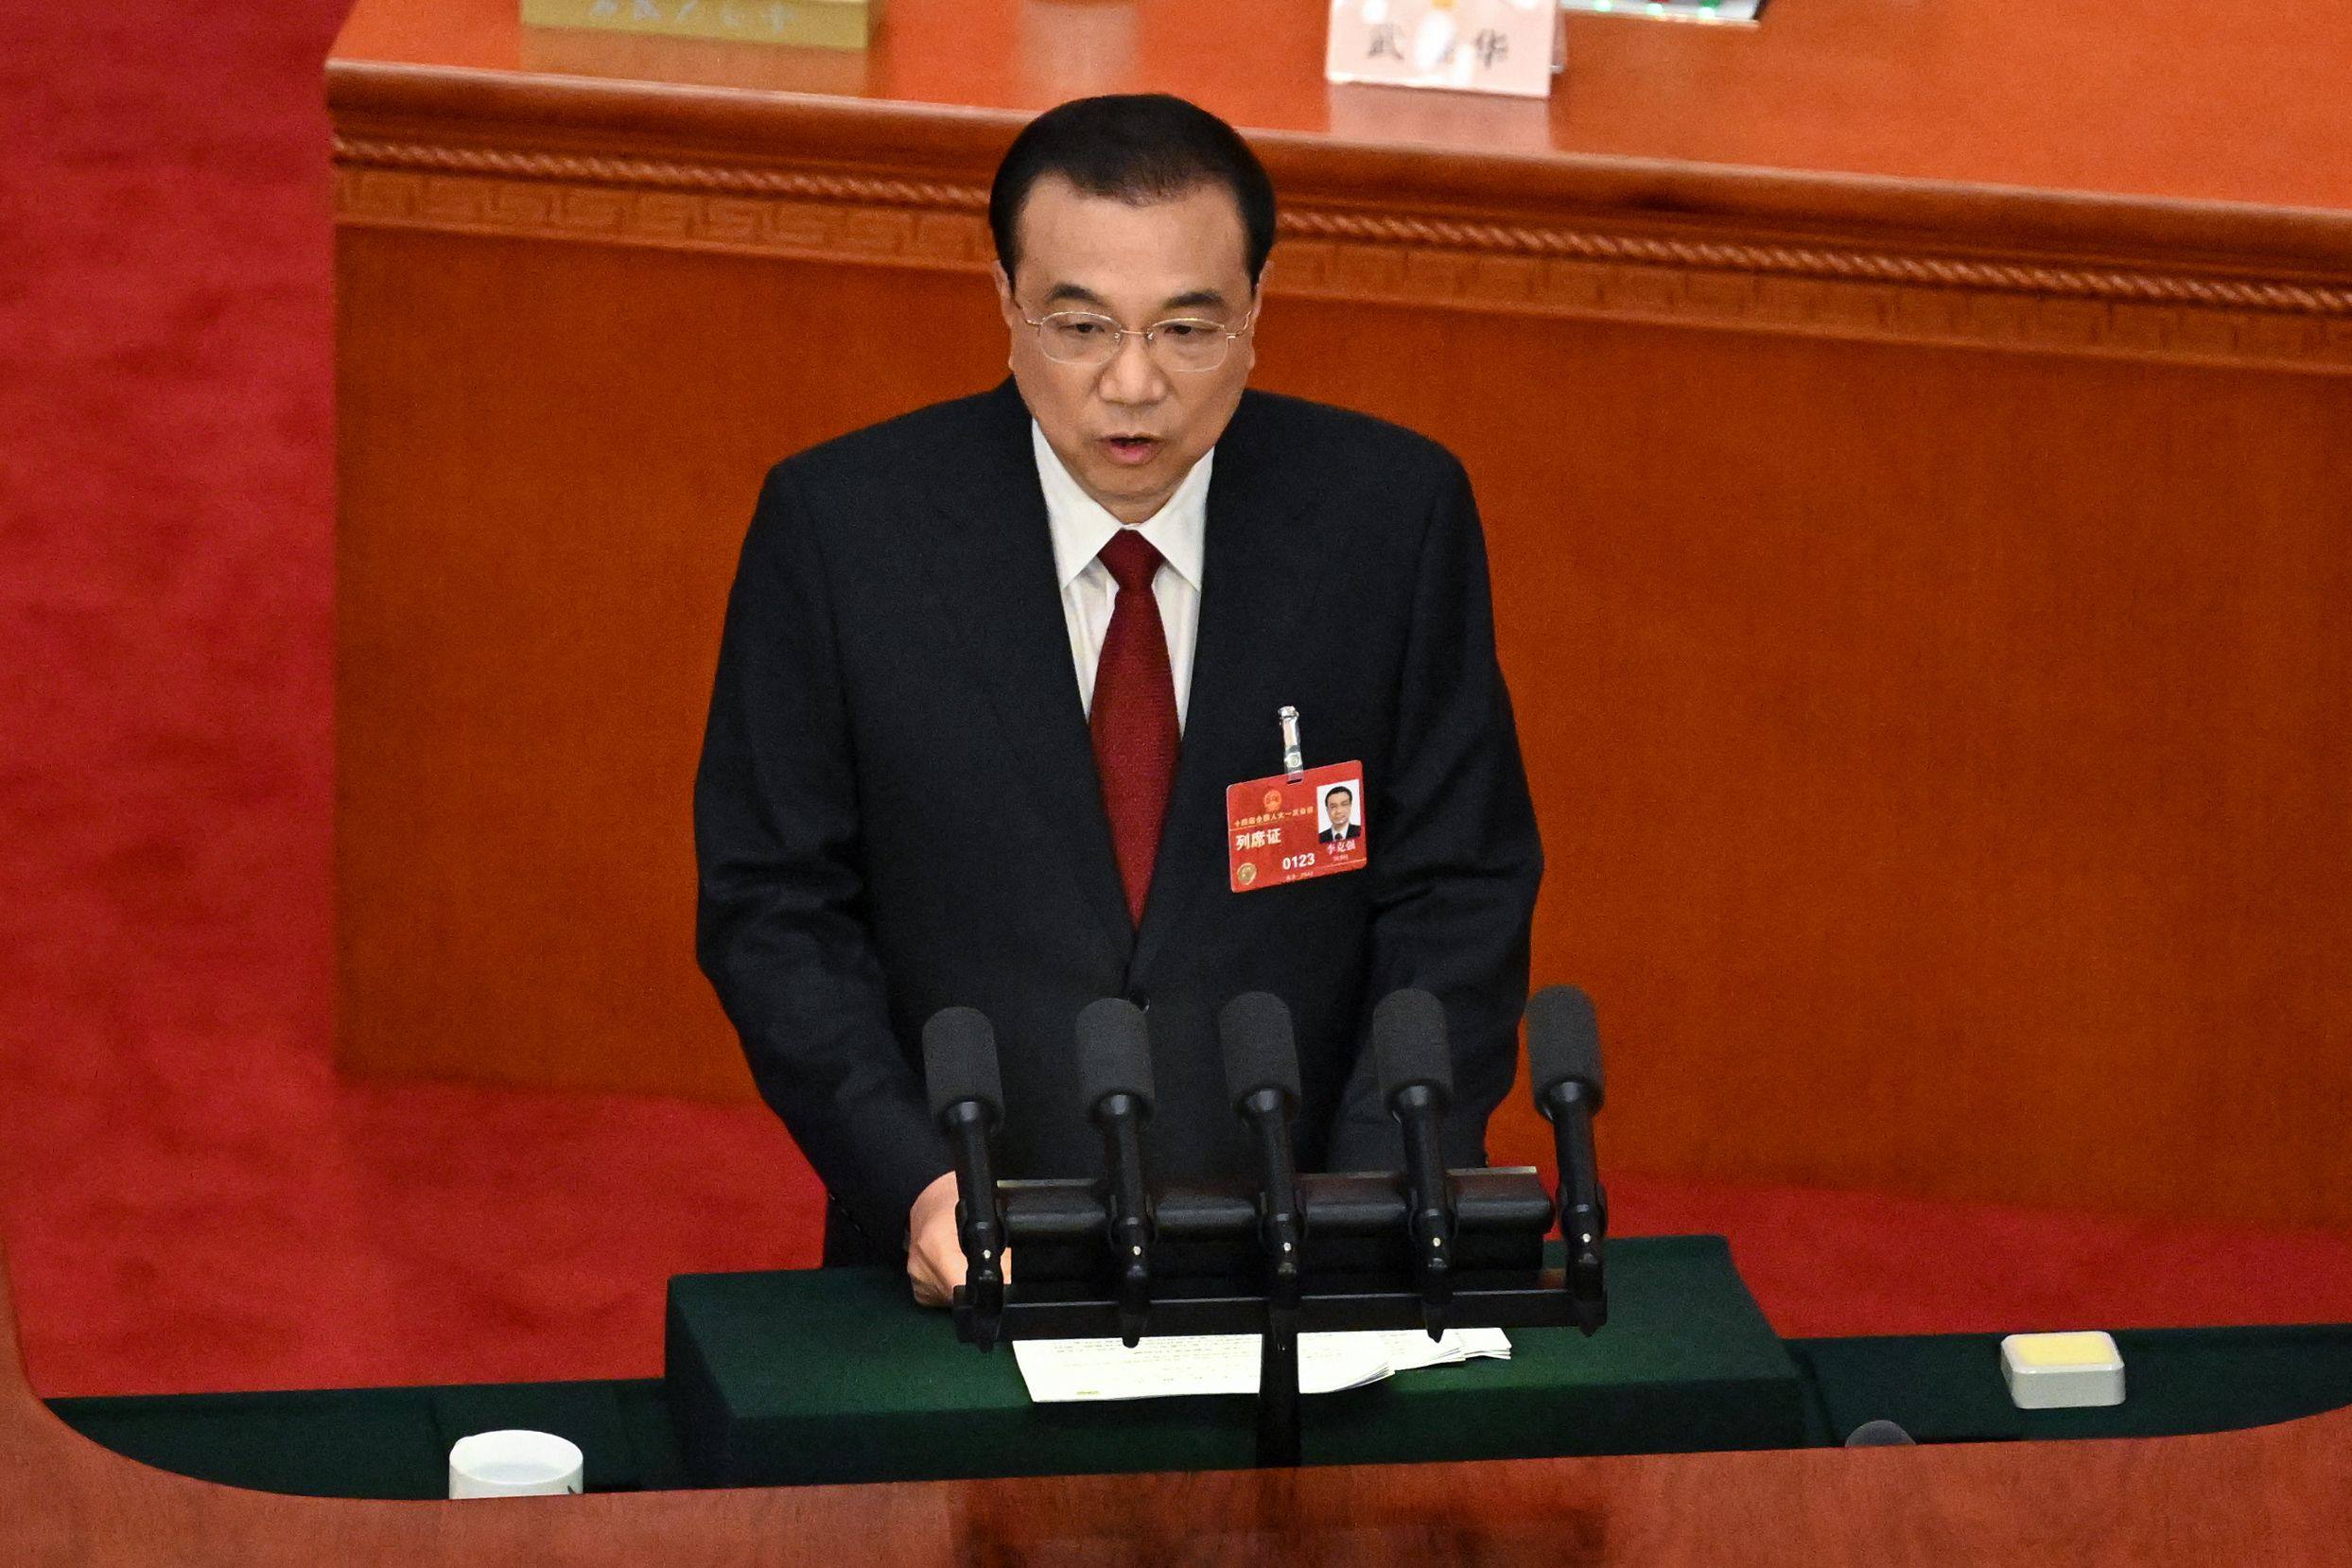 Chinese Premier Li Keqiang delivers his work report at the opening session of the National People’s Congress in Beijing on Sunday. Photo: AFP